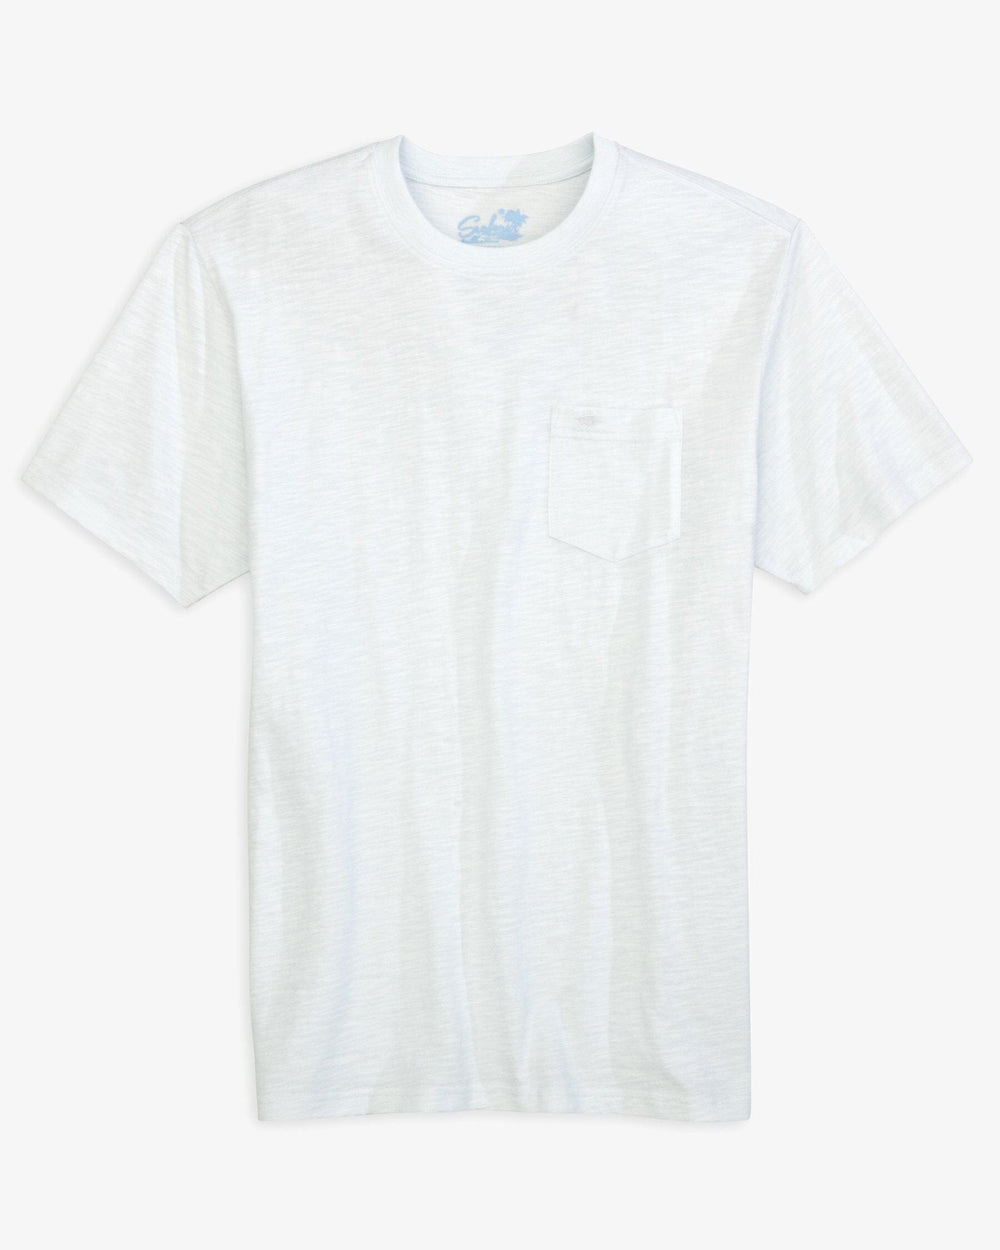 The front of the Men's Sun Farer Short Sleeve T-Shirt by Southern Tide - Classic White